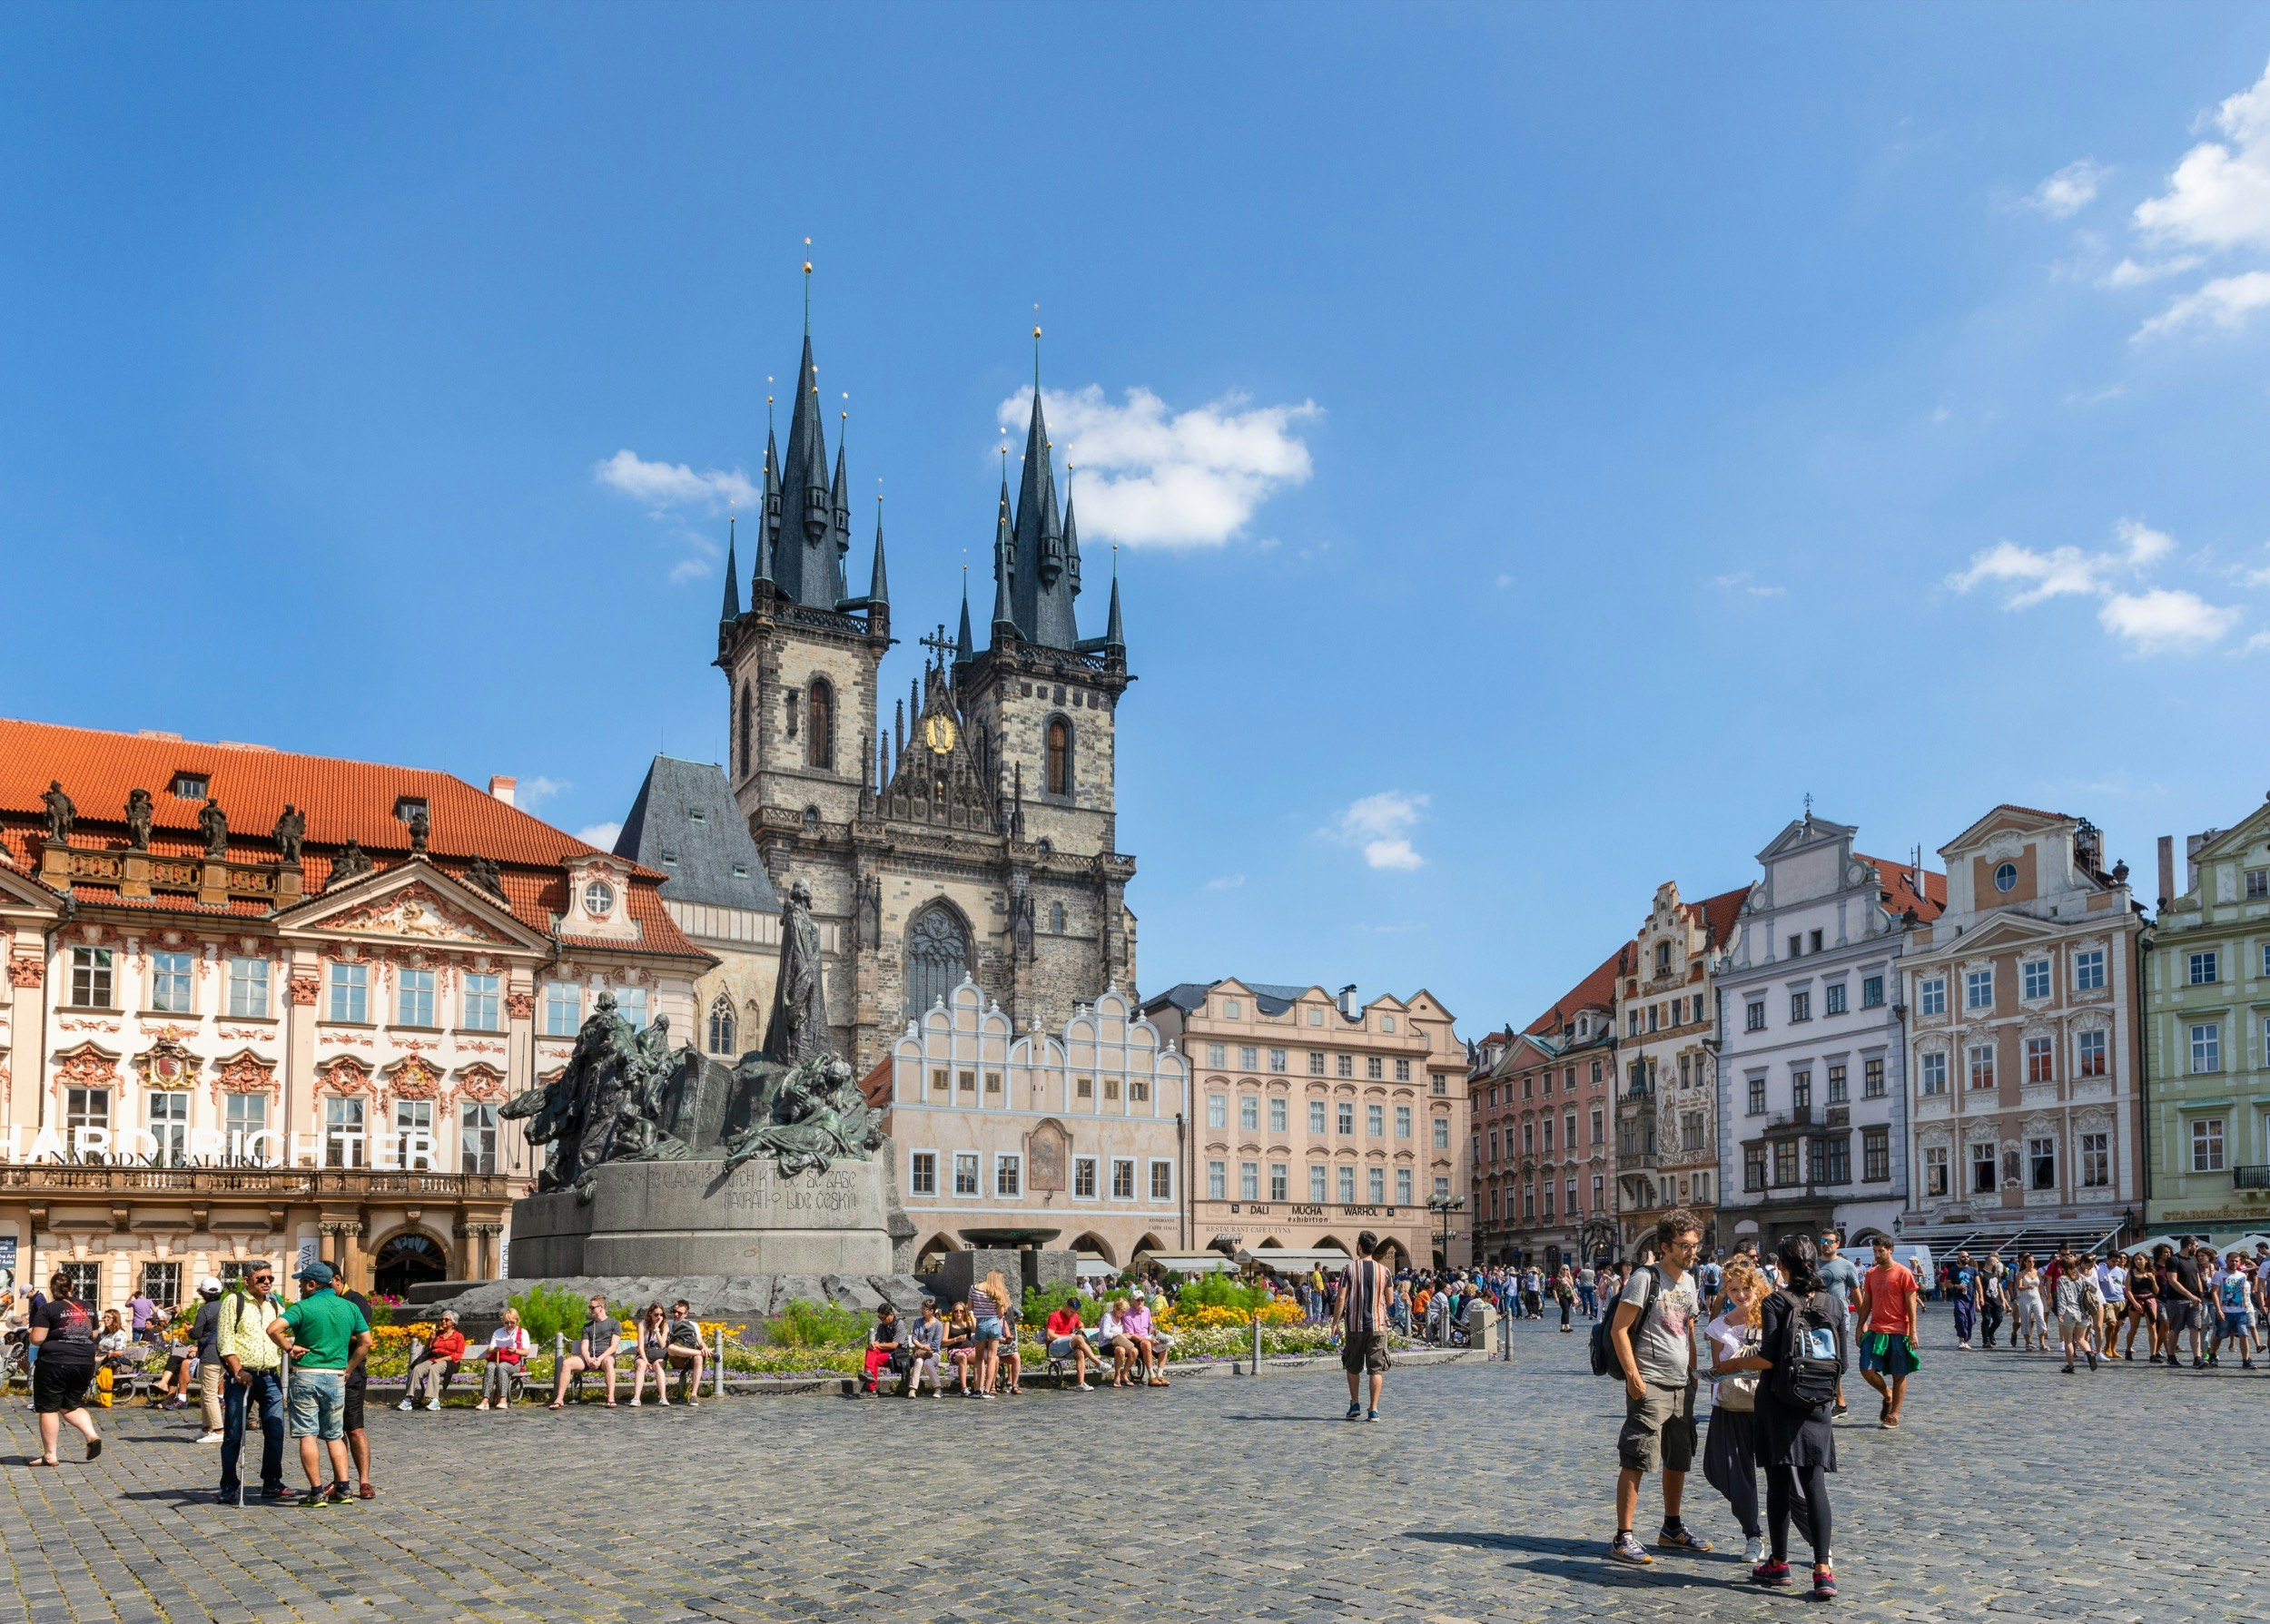 A large group of people gather around the Jan Hus Memorial in Old Town Square in Prague